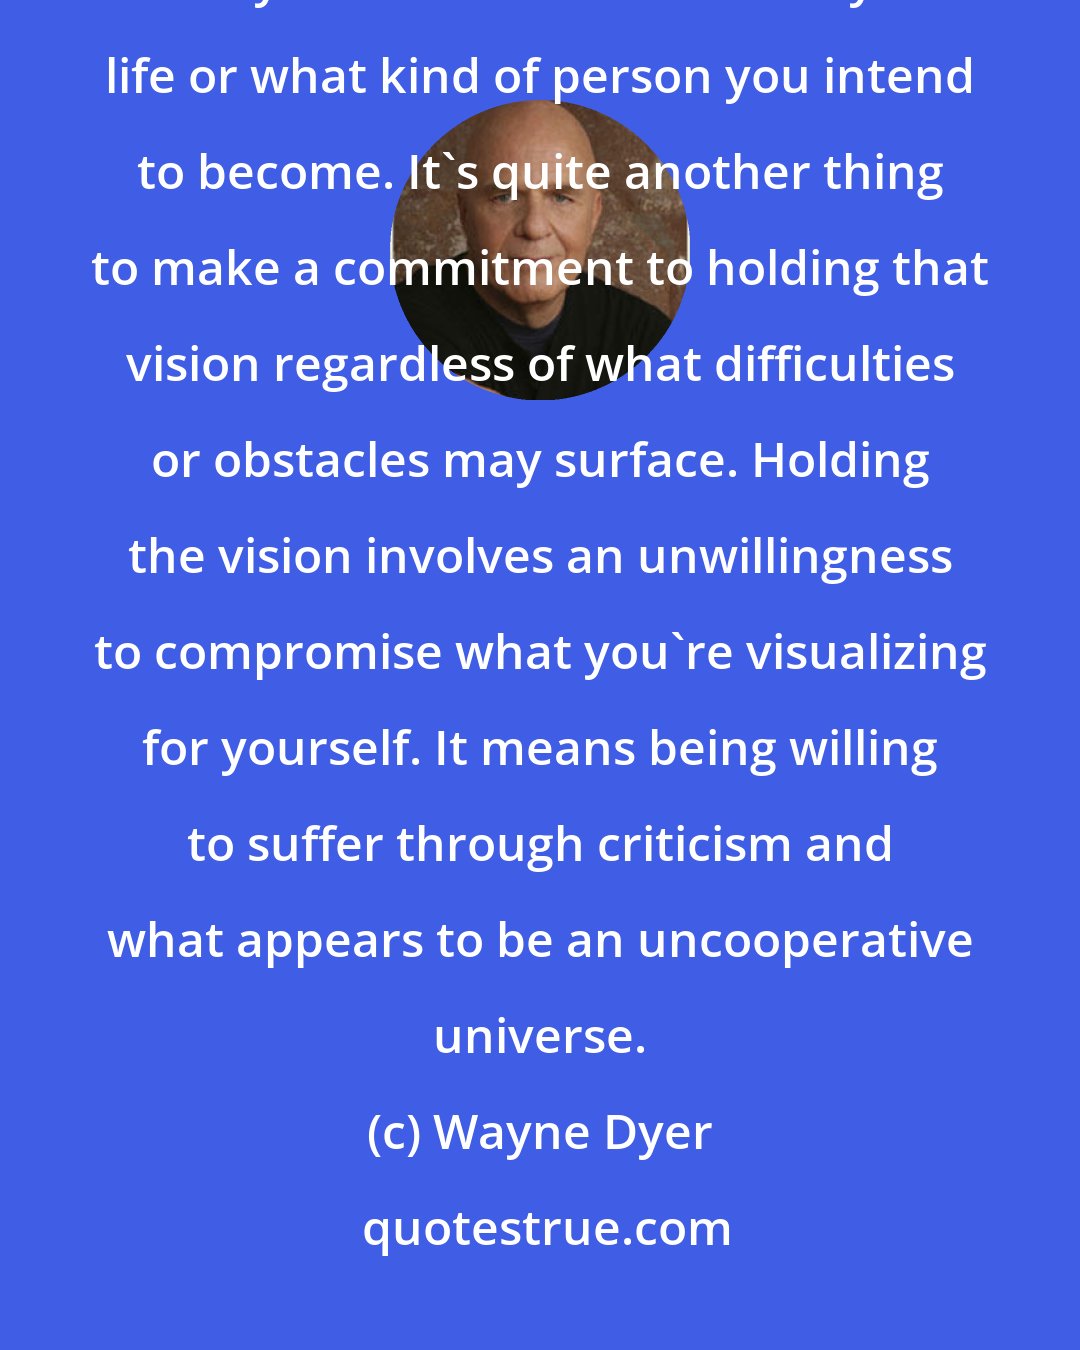 Wayne Dyer: It's one thing to make a pronouncement in a moment of inspiration about what you intend to manifest in your life or what kind of person you intend to become. It's quite another thing to make a commitment to holding that vision regardless of what difficulties or obstacles may surface. Holding the vision involves an unwillingness to compromise what you're visualizing for yourself. It means being willing to suffer through criticism and what appears to be an uncooperative universe.